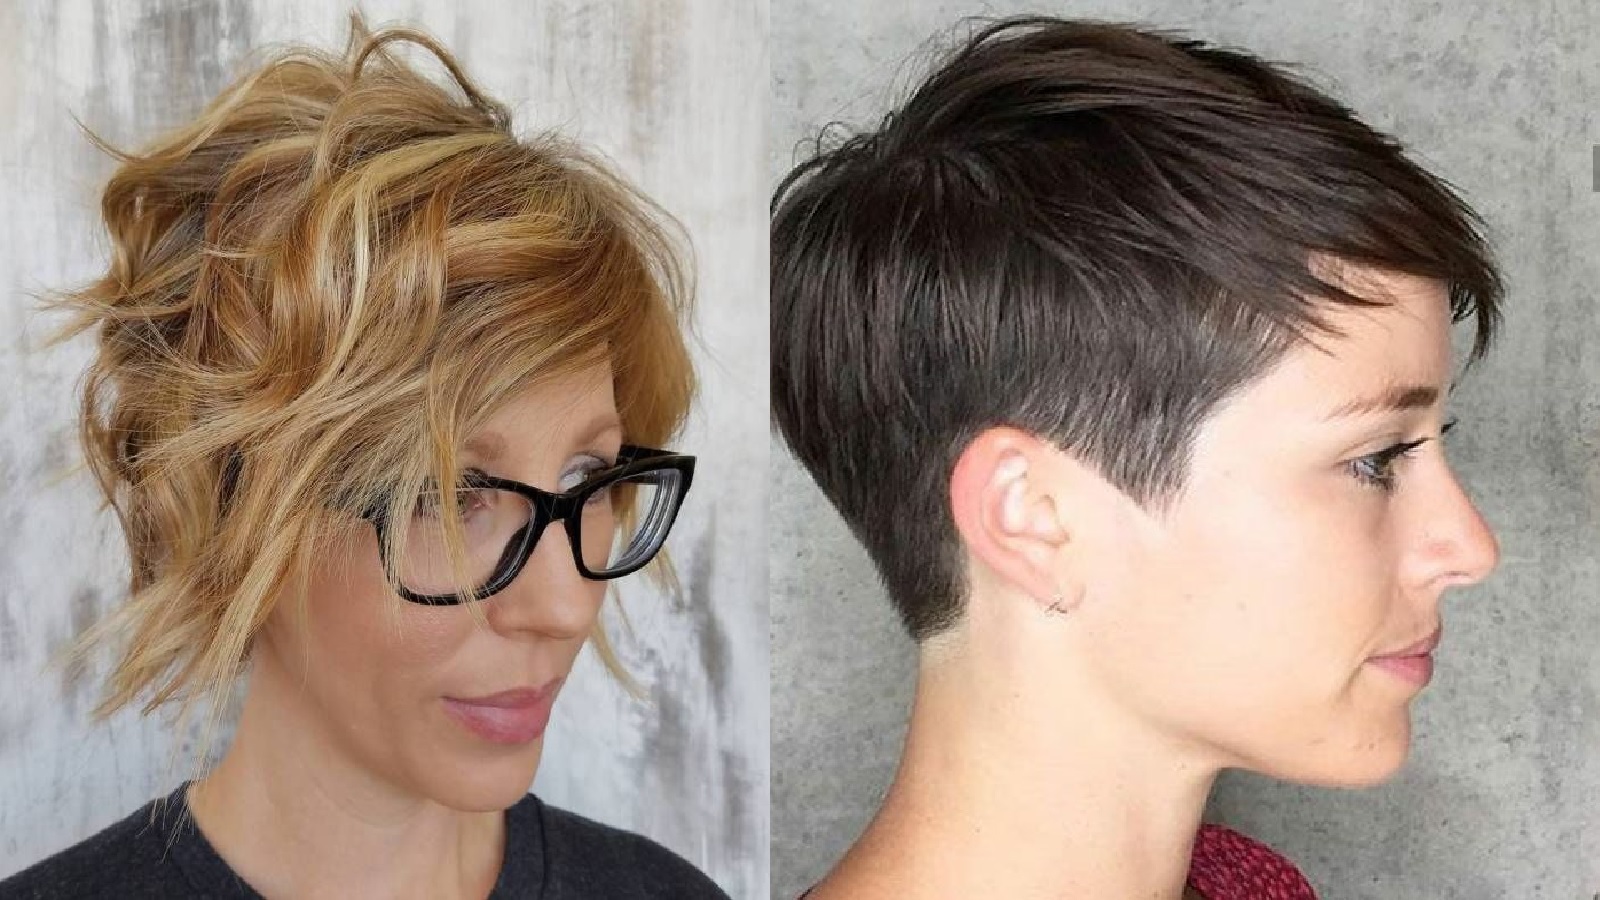 hairstyles for short hair for the summer